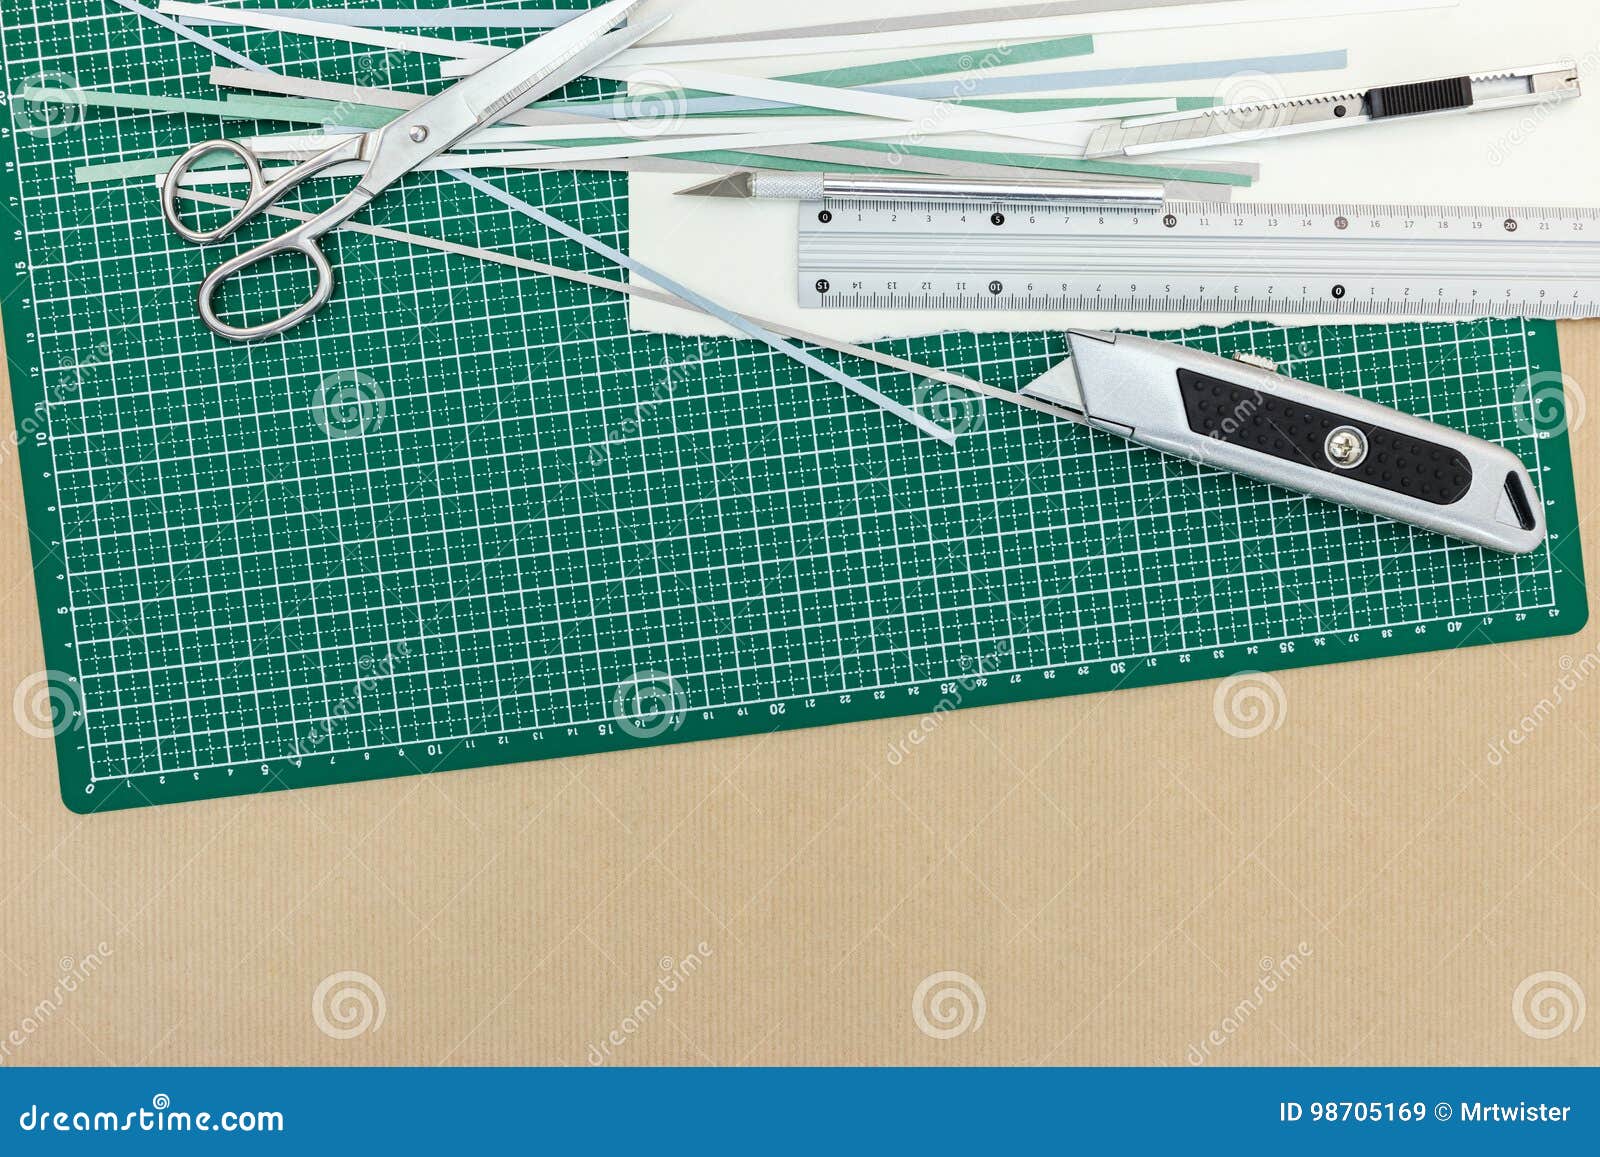 Green Cutting Mat With Scissors Cutter And Metal Ruler On Desk